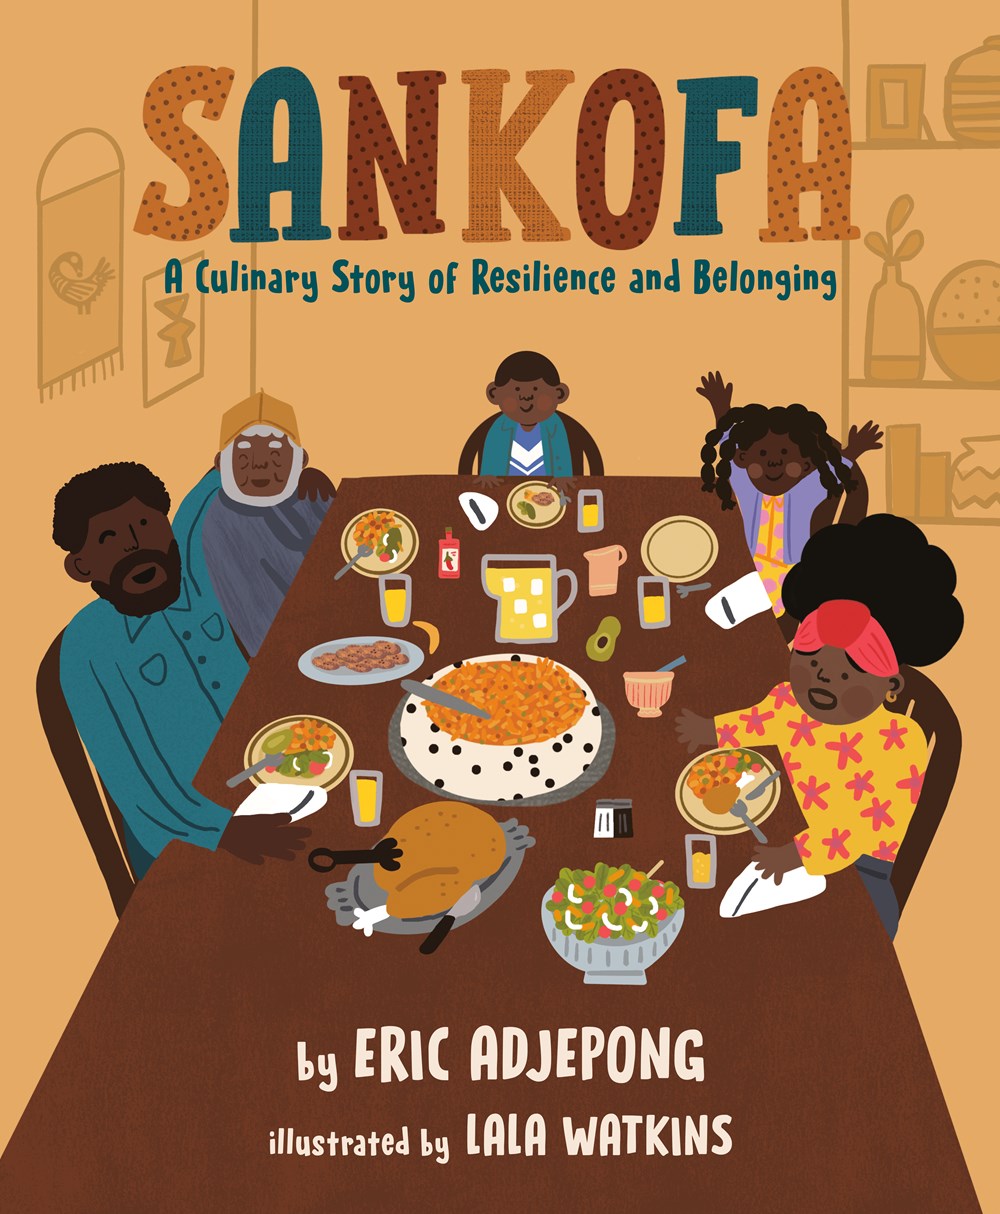 PRE-ORDER: Sankofa: A Culinary Story of Resilience and Belonging